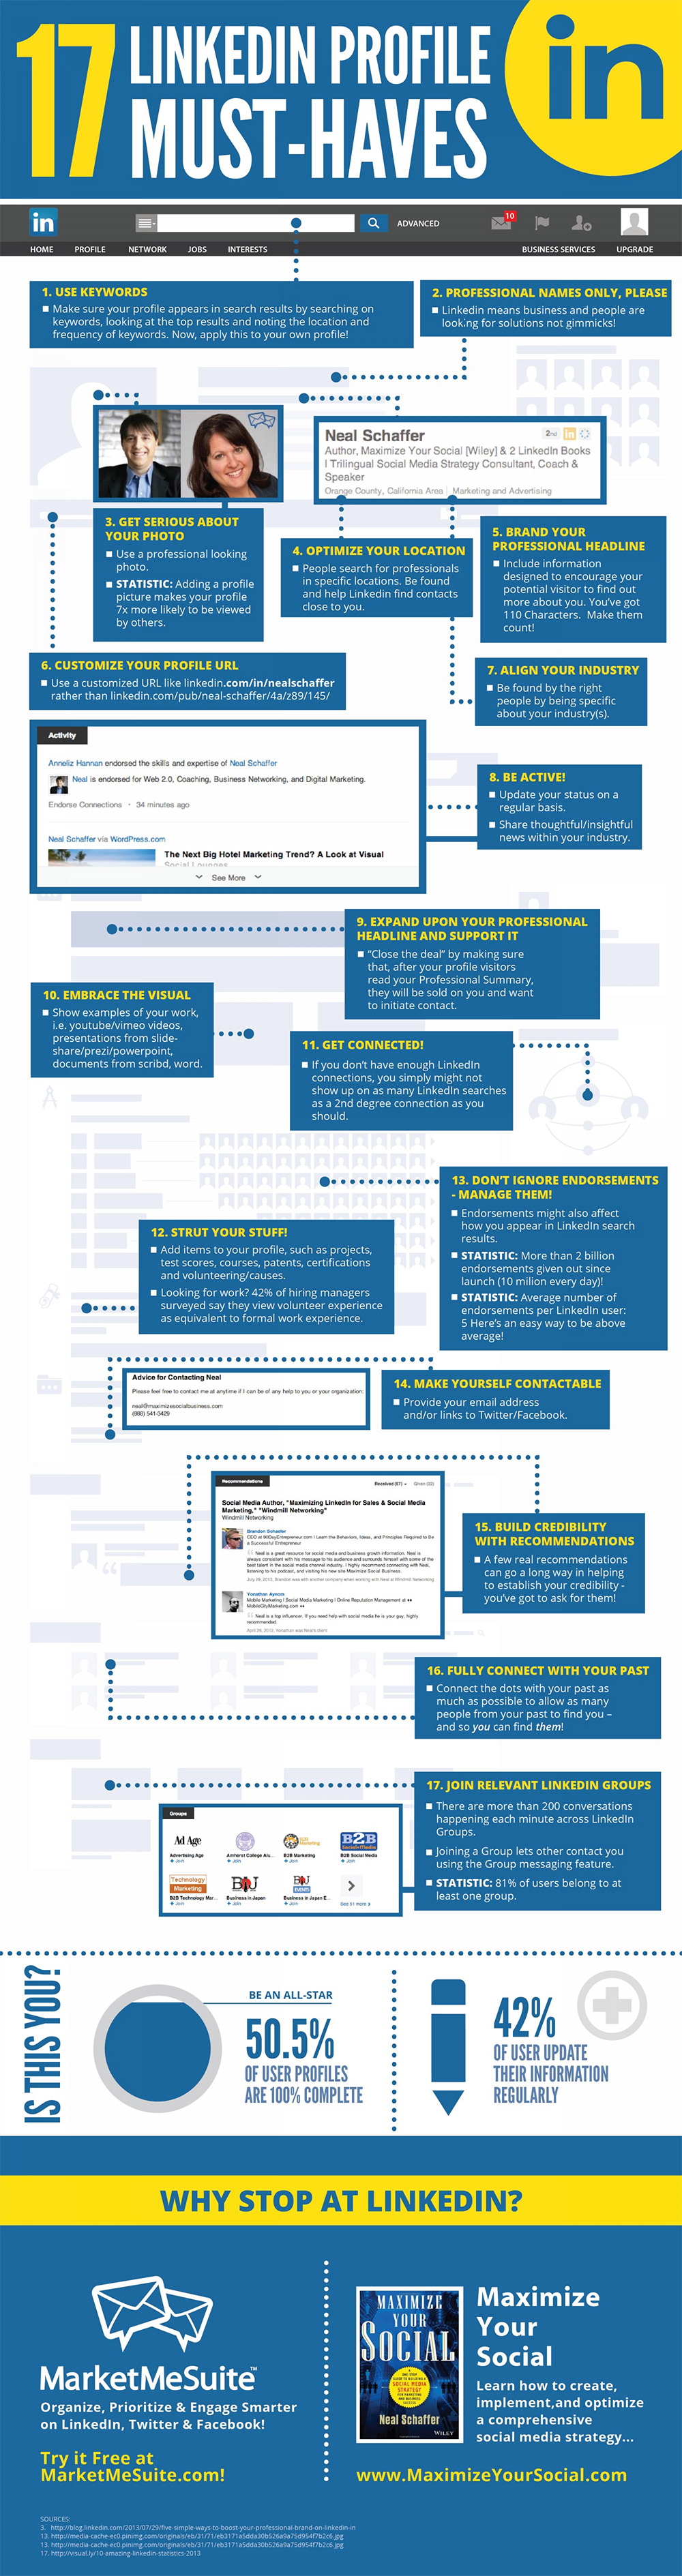 1393271821-17-must-have-features-linkedin-profile-infographic